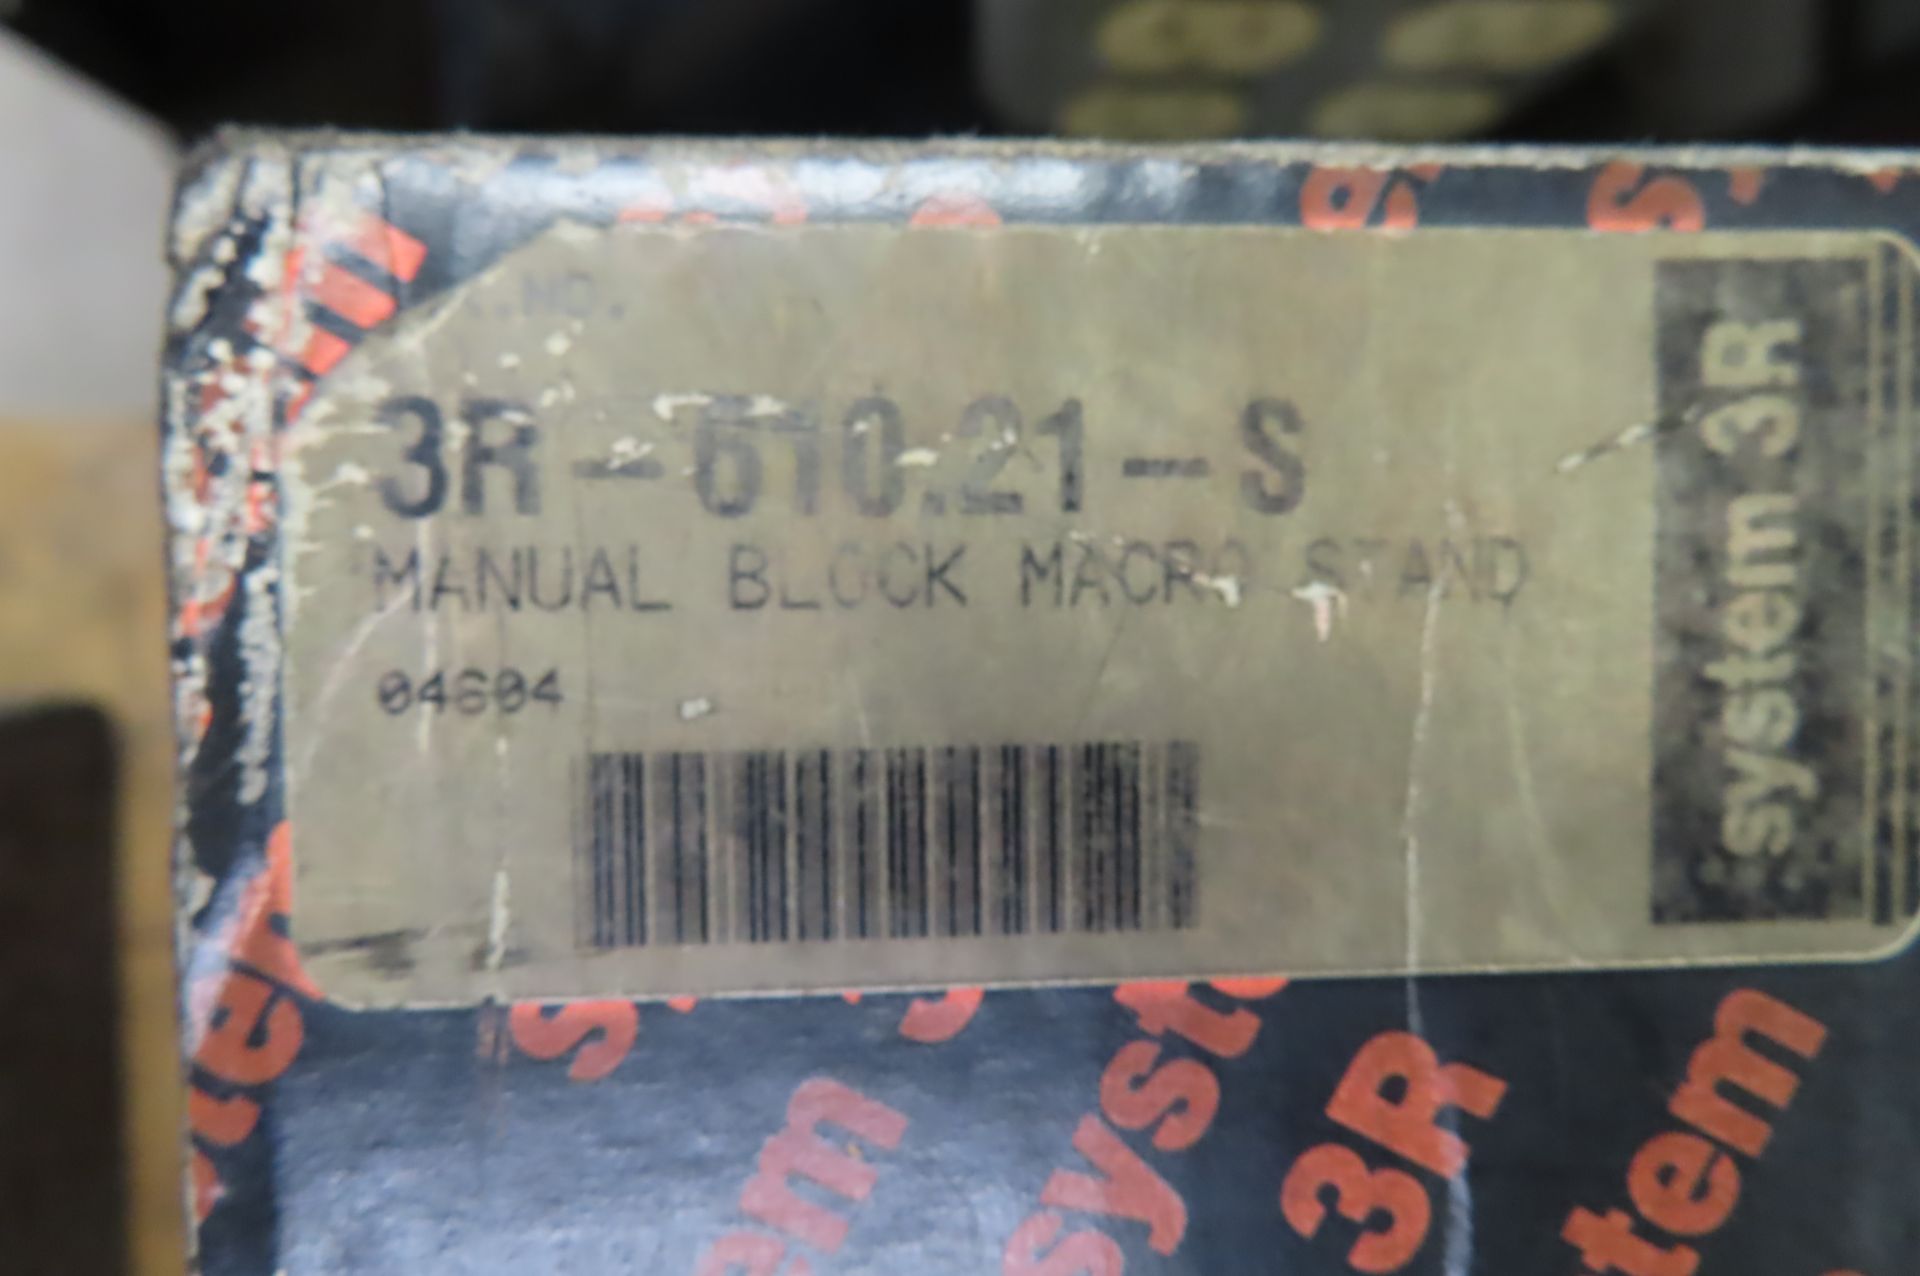 SYSTEM 3R 610.21-S MANUAL BLOCK MACRO STAND - Image 3 of 3